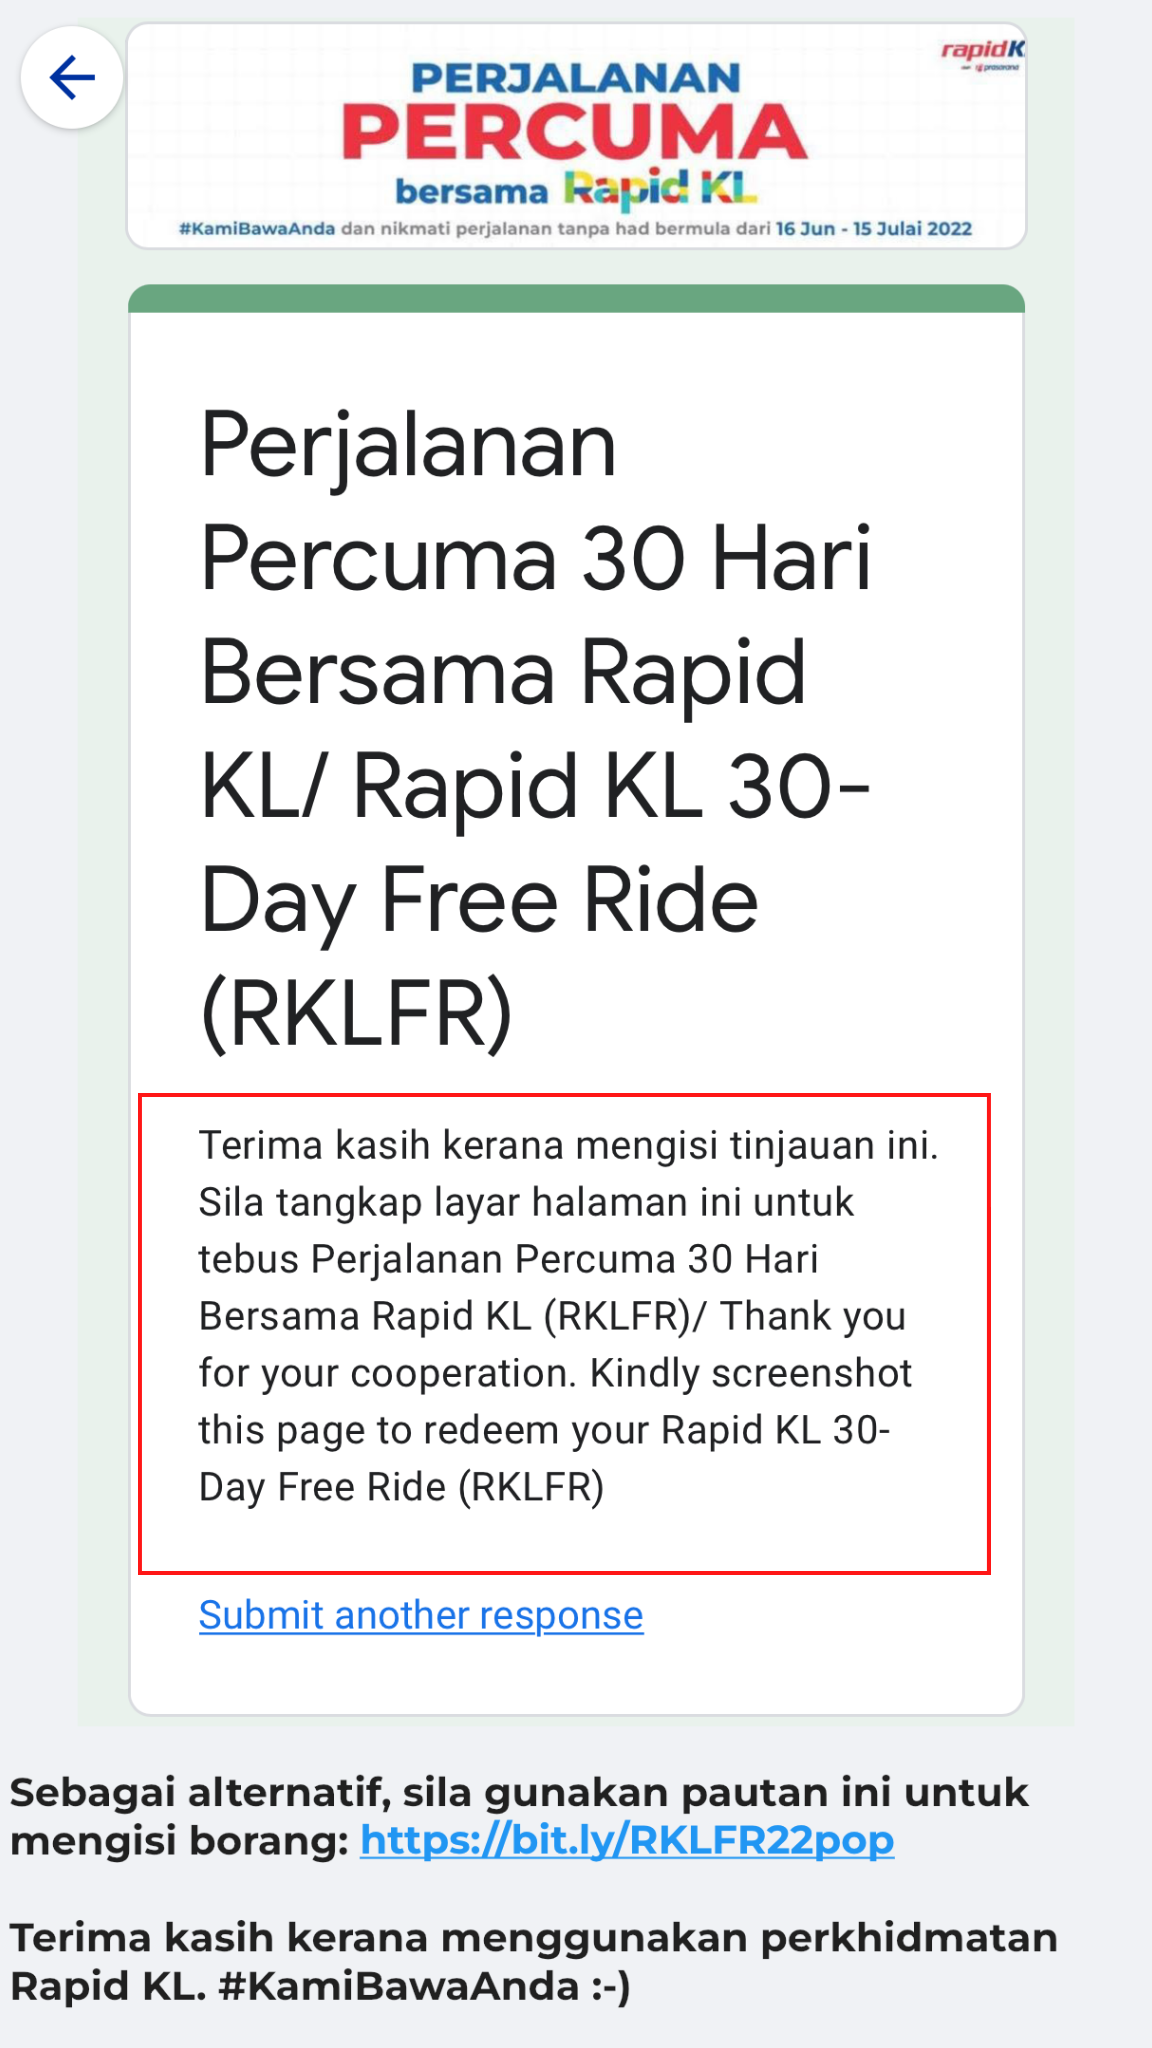 My50 users can claim additional one month free ride in rapidkl